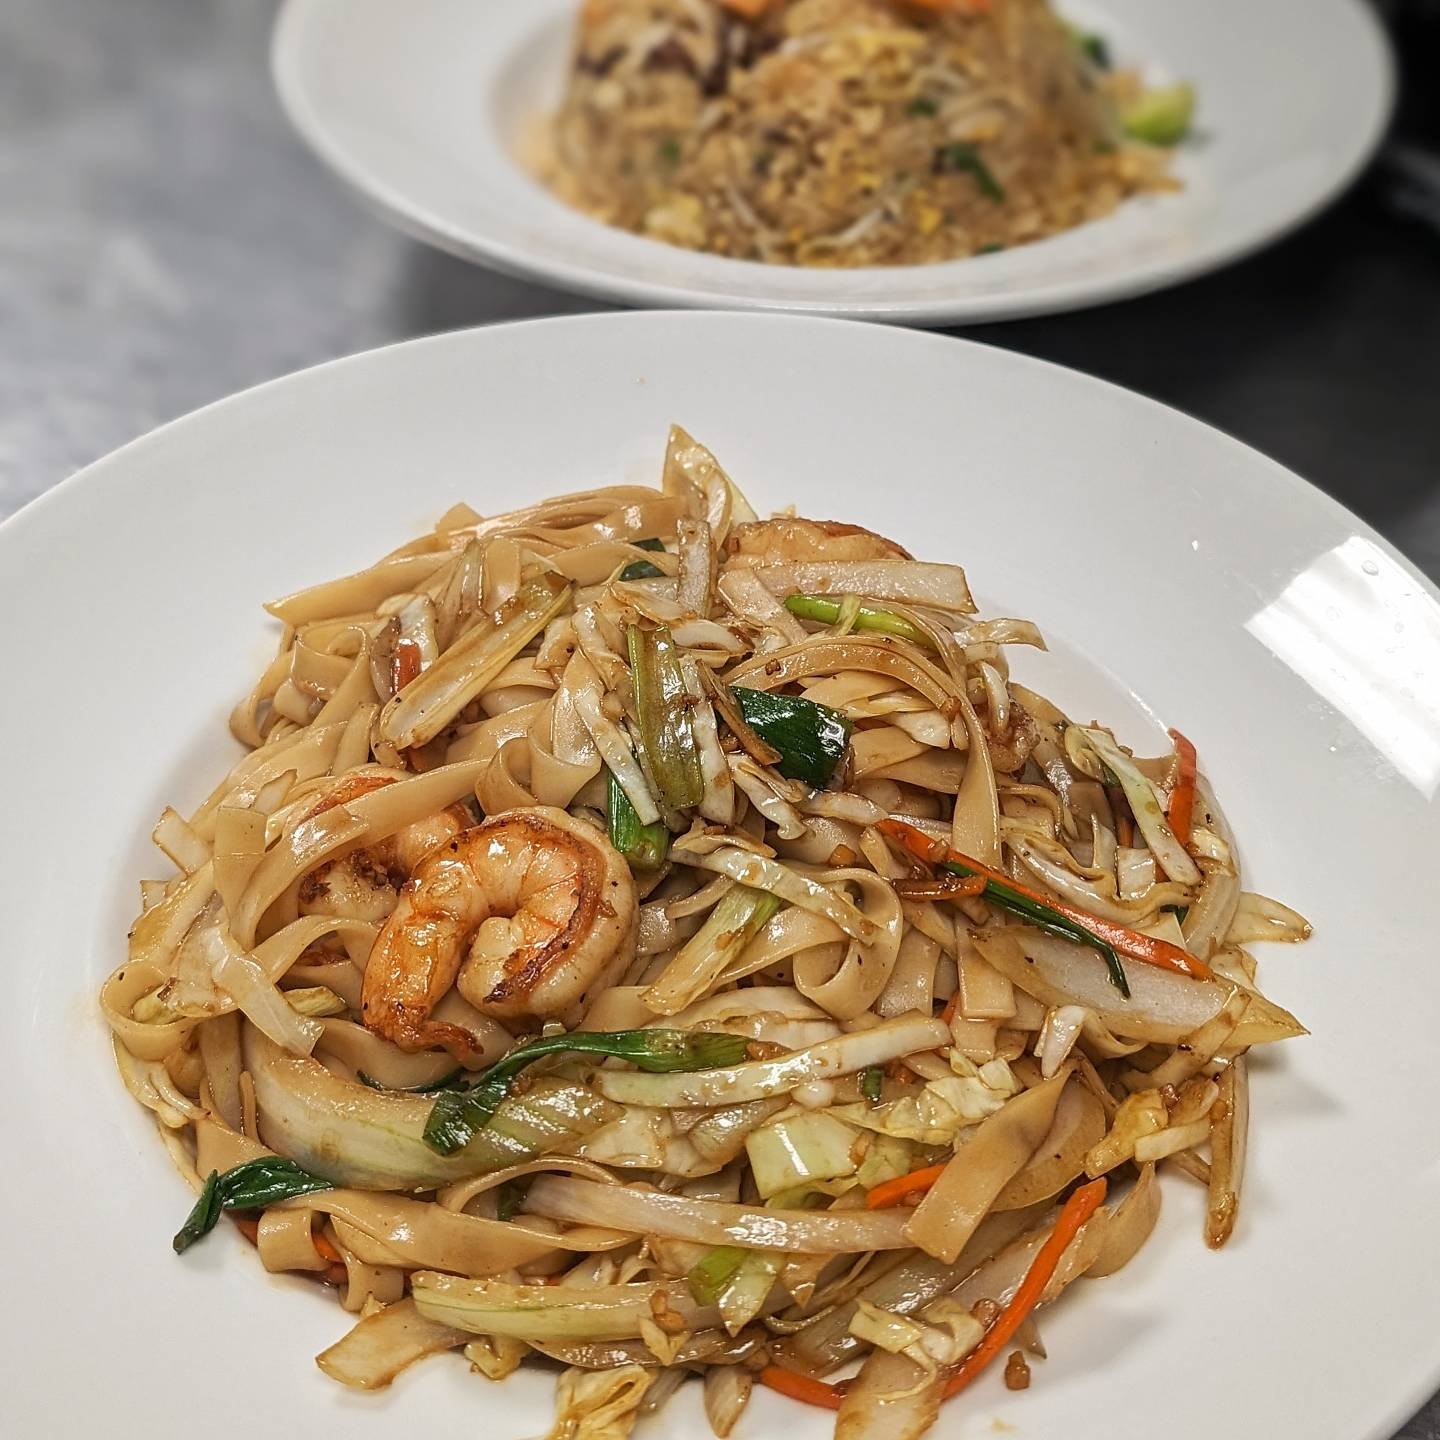 You know what sounds good for dinner? Some shrimp lo mein from The Rice Hat. 😘🍤

#thericehattx #portlandtx #portlandtxsmallbusiness #cceats